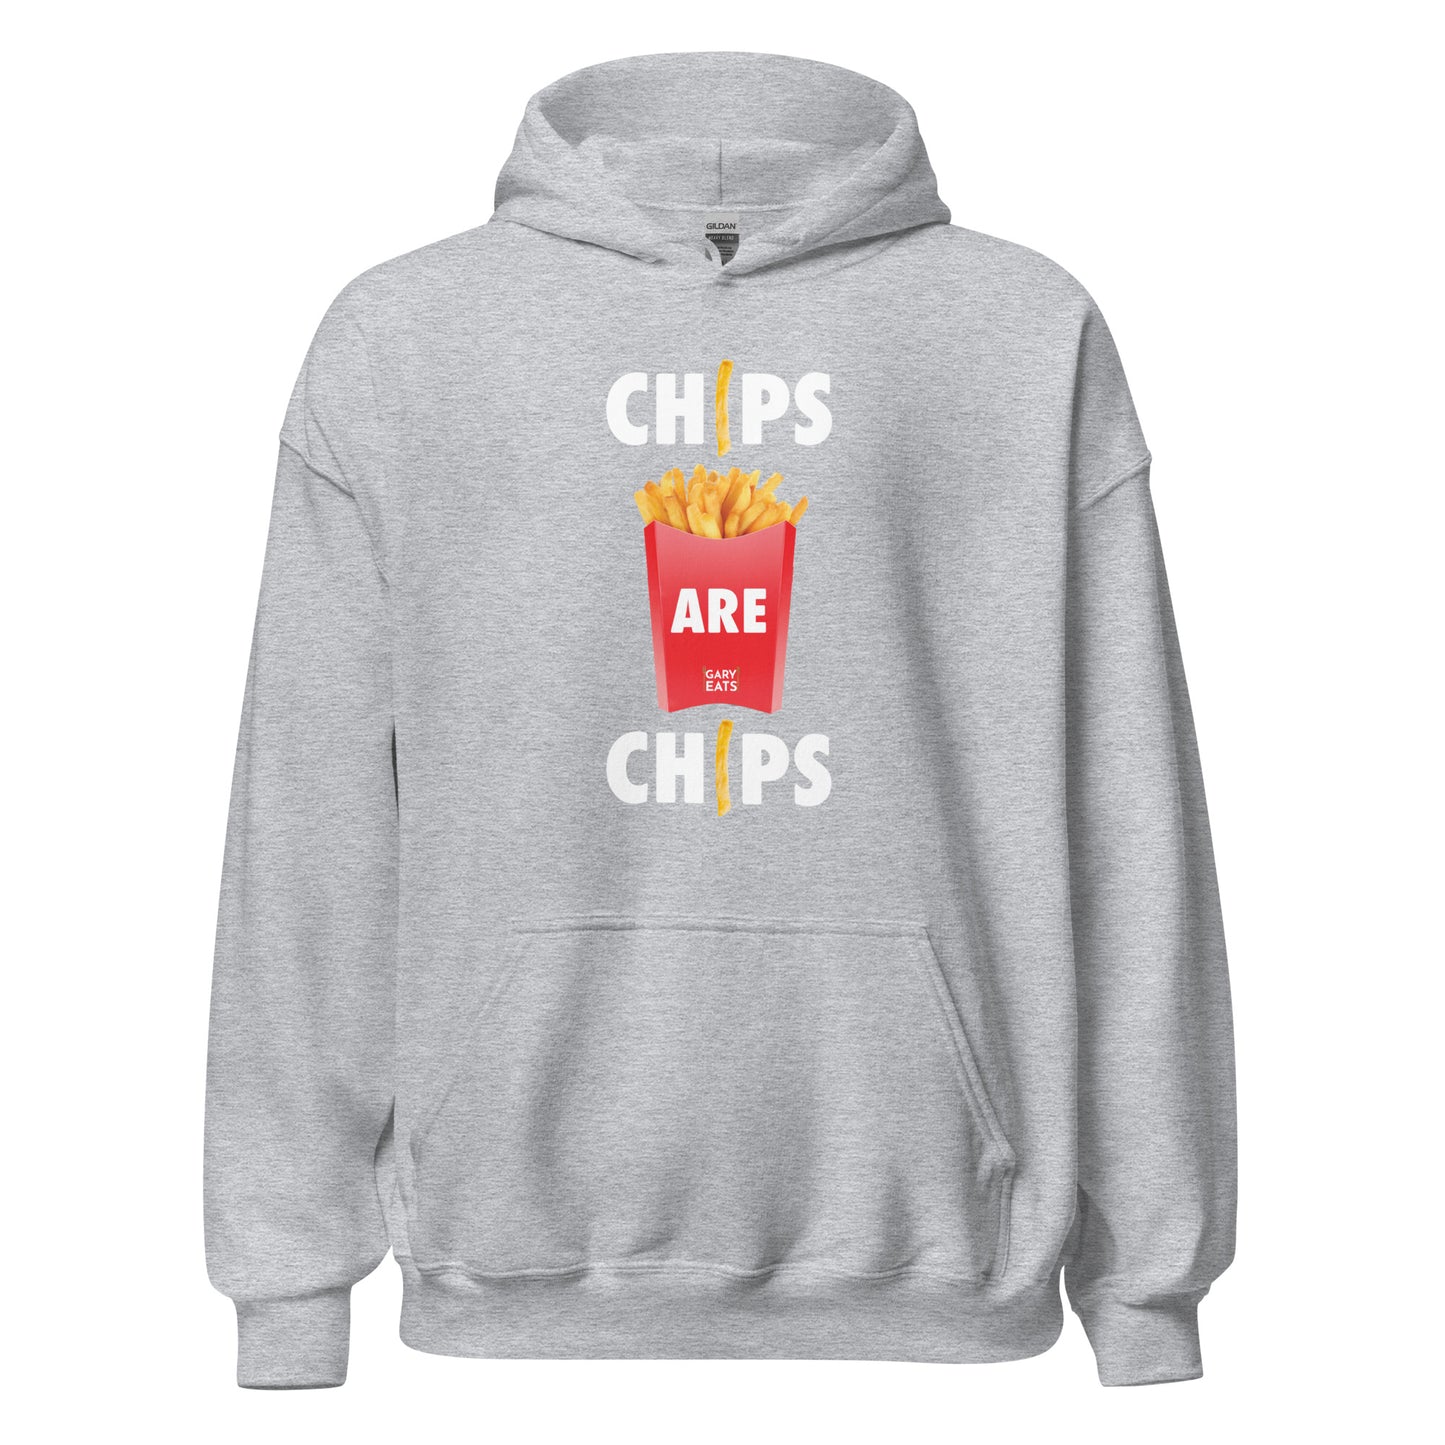 Gary Eats Chips are Chips Unisex Hoodie